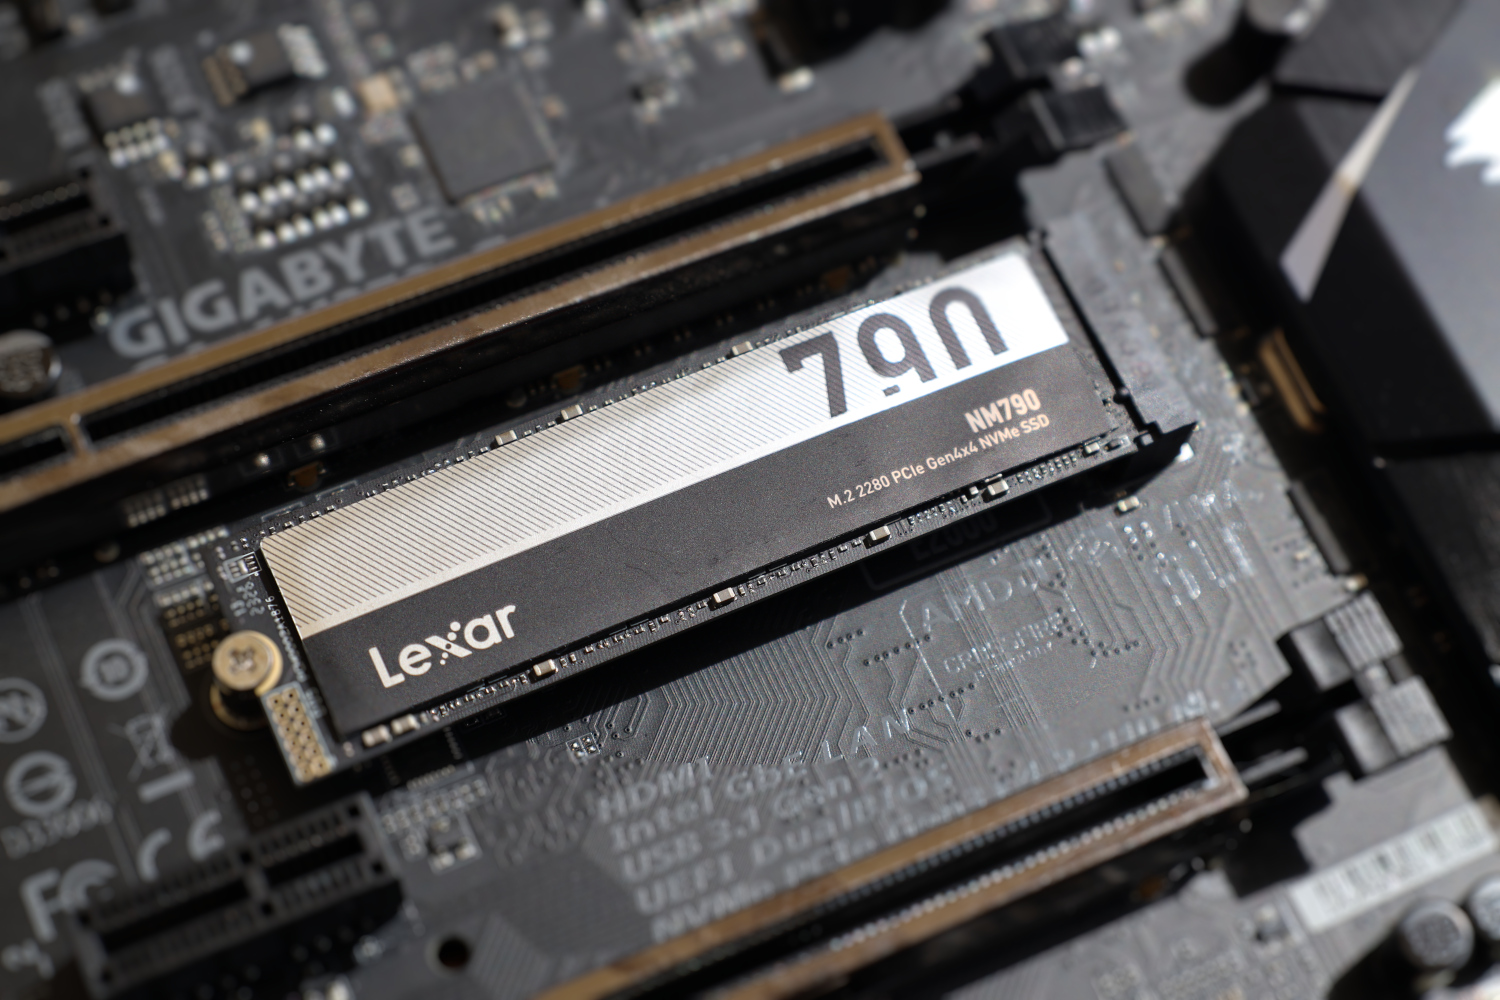 Lexar NM790 M 2 SSD Review - A Single Sided 4tb SSD perfect for your  Laptop! 